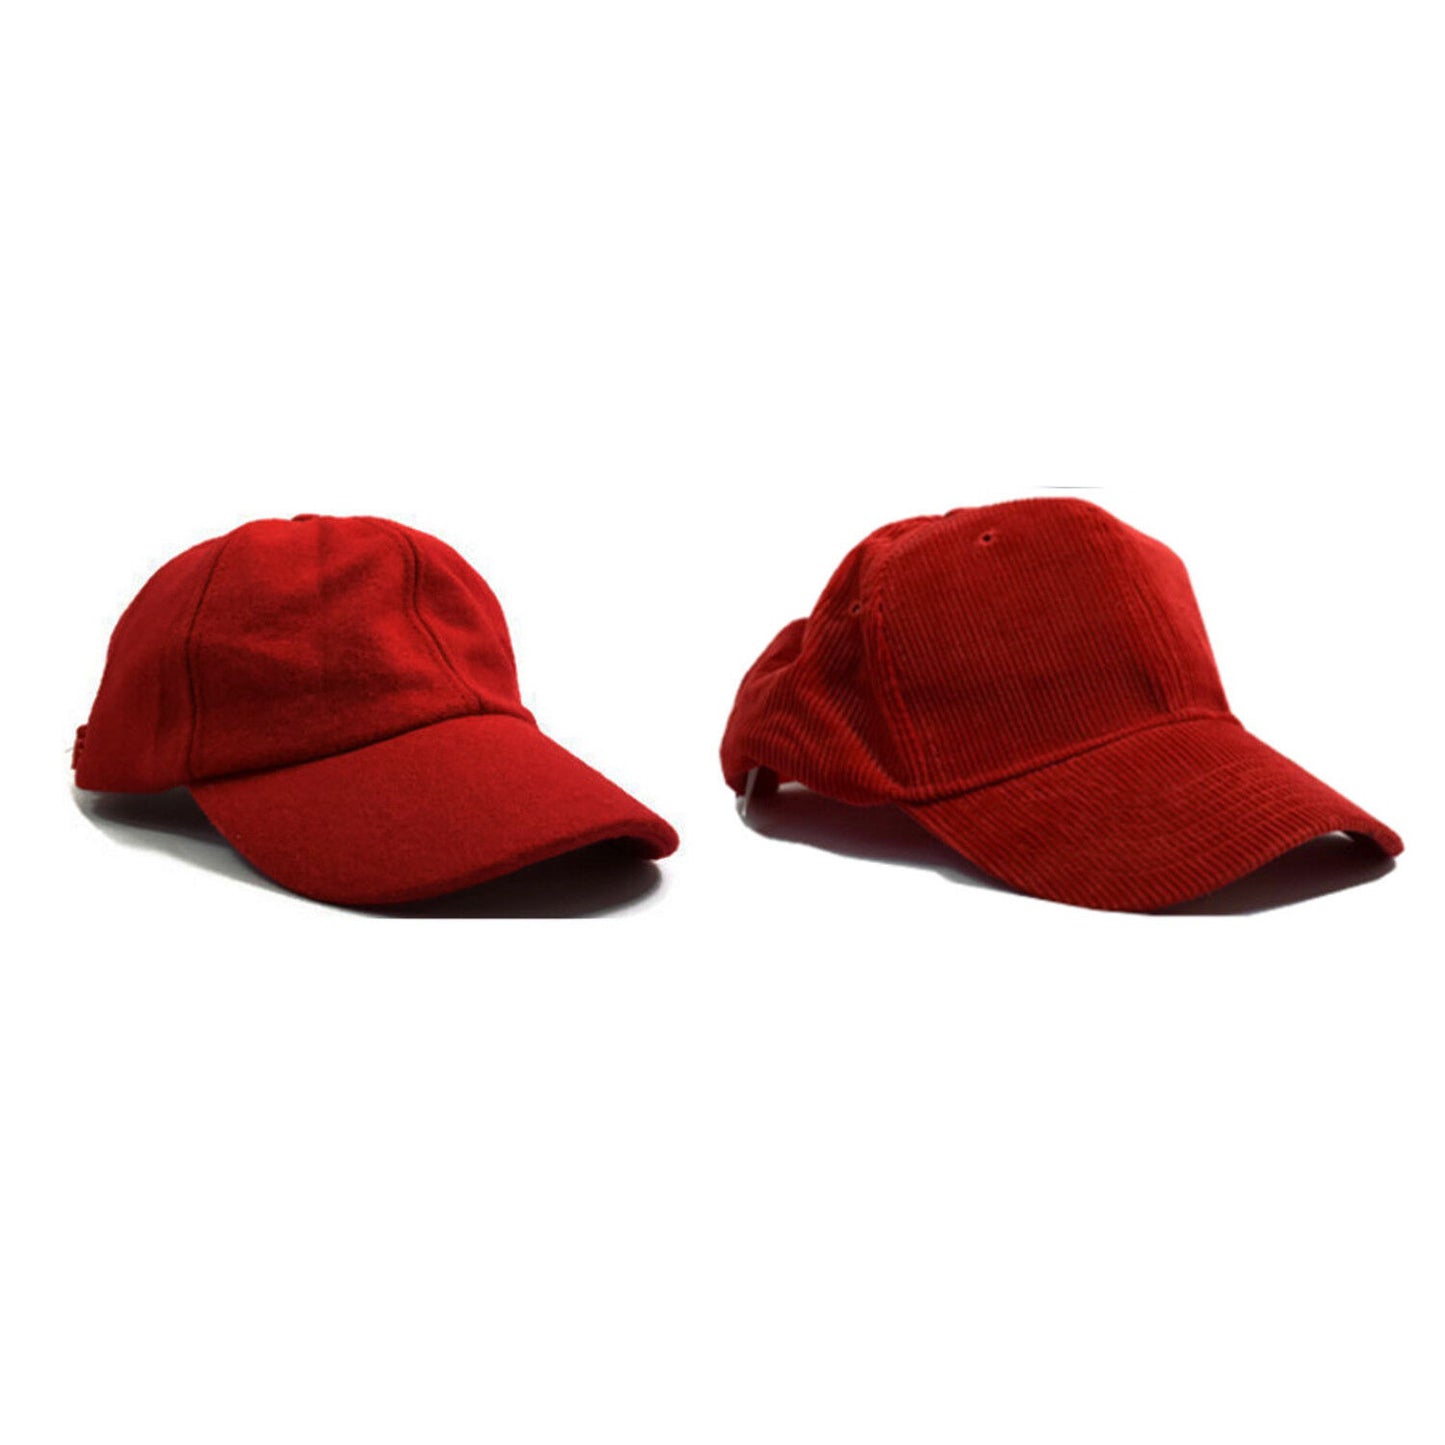 Red Classic Adjustable Baseball Caps - Work Casual Sports Leisure